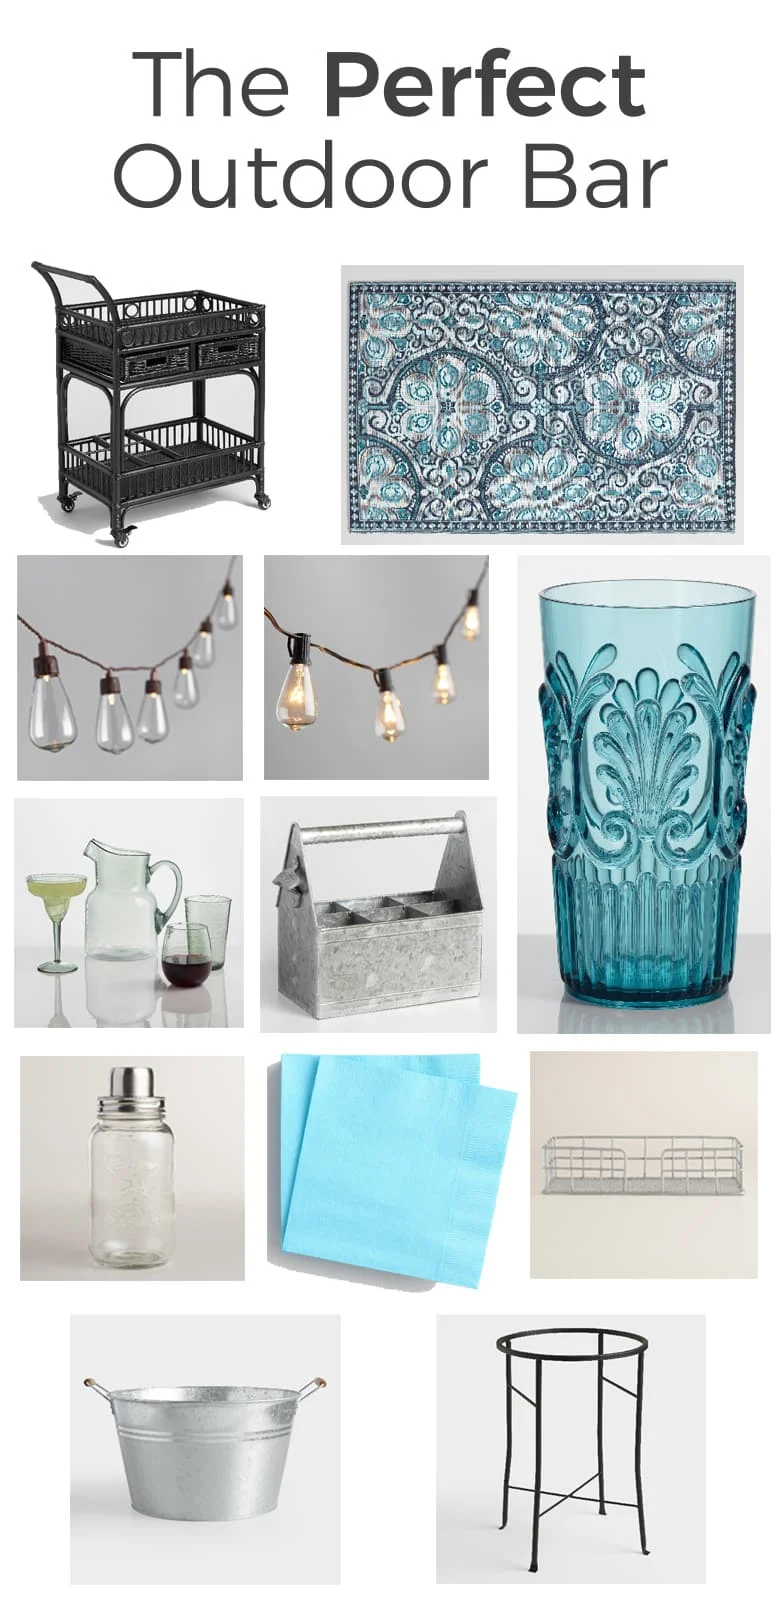 The perfect outdoor bar is a mix of classic pieces and color. Keep it unisex by sticking with a fun, yet neutral palette and galvanized steel.